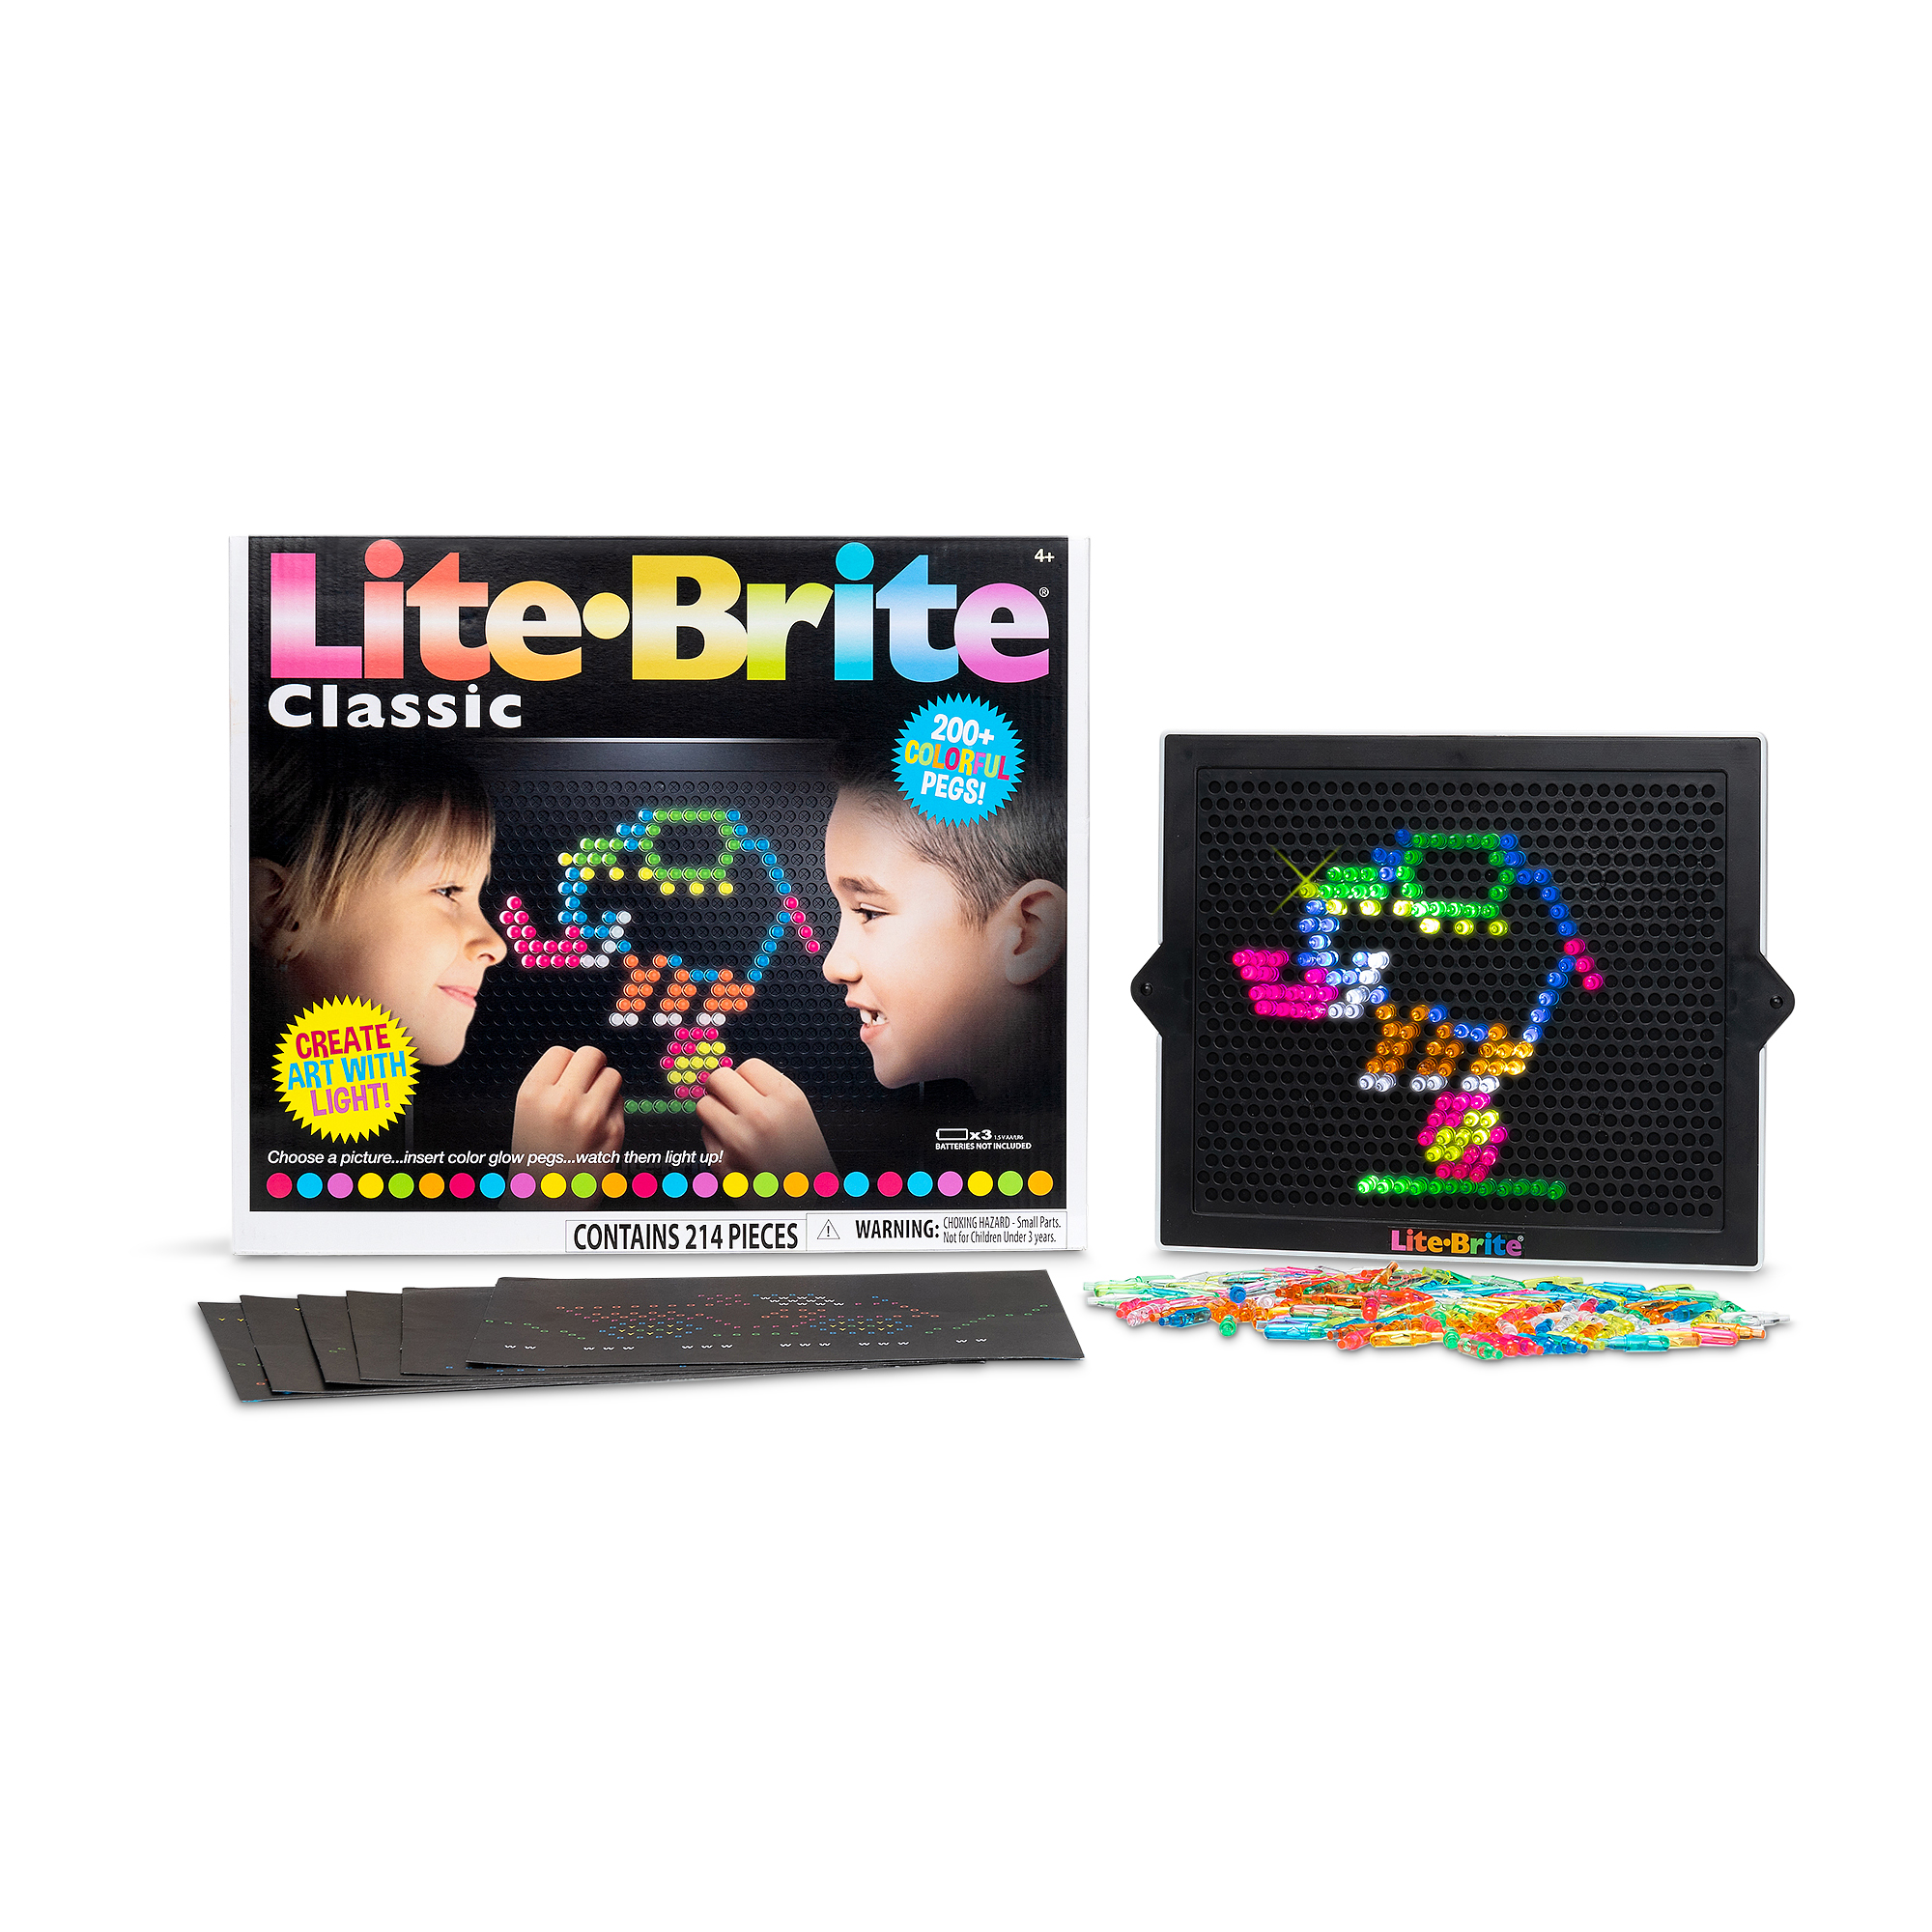 Lite-Brite Classic, Favorite Retro Toy - Create Art with Light, STEM, Educational Learning, Holiday, Birthday, Gift, Boys, Unisex, Kid, Toddler, Girls Age 4+ - image 1 of 10